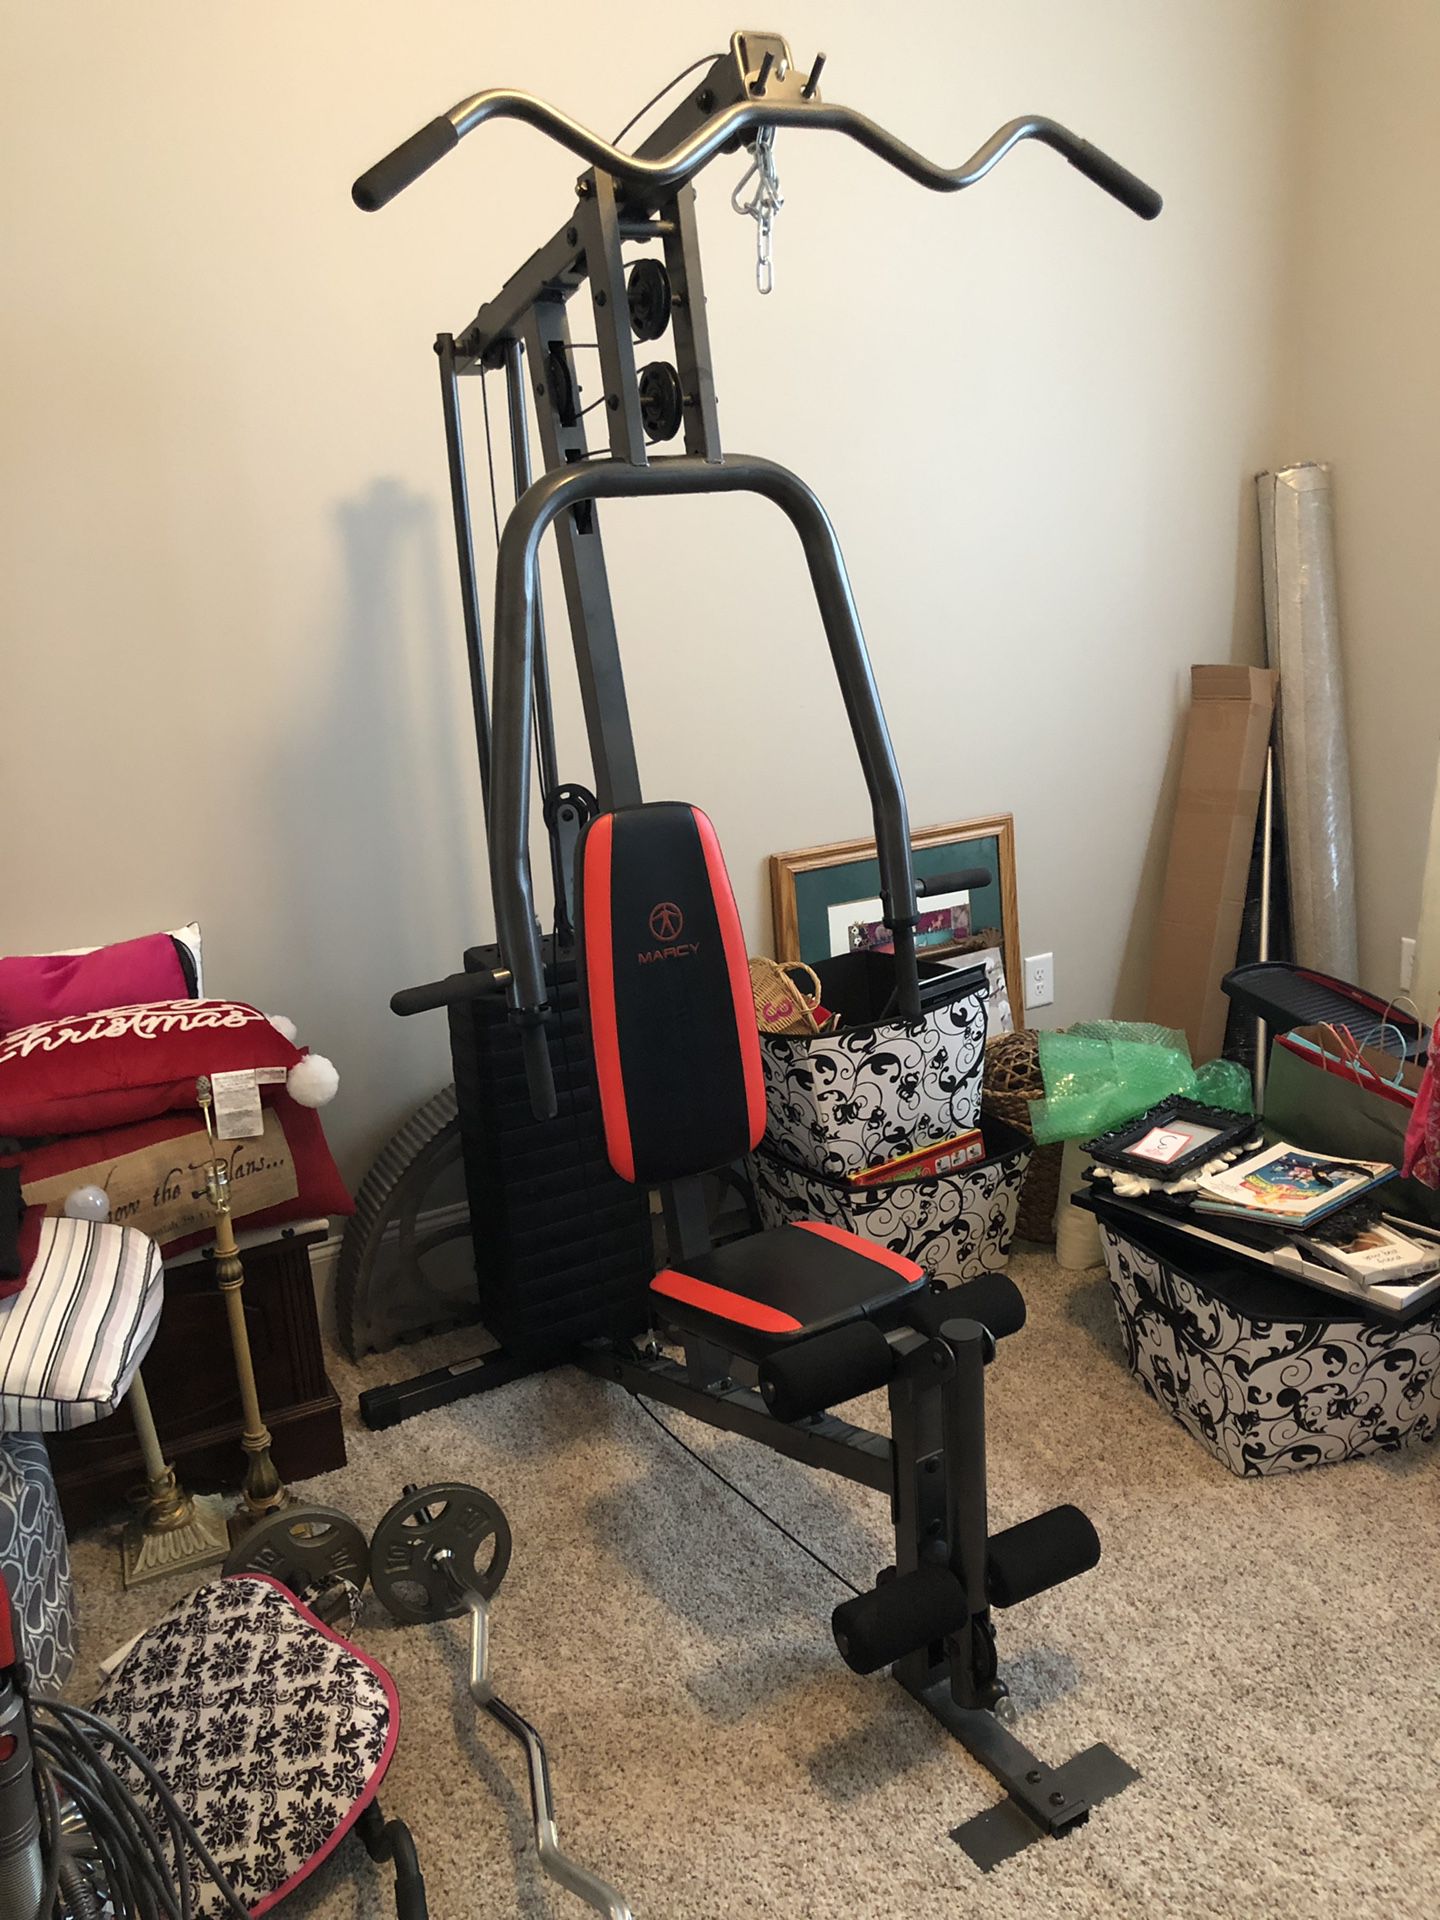 Marcy Home Gym